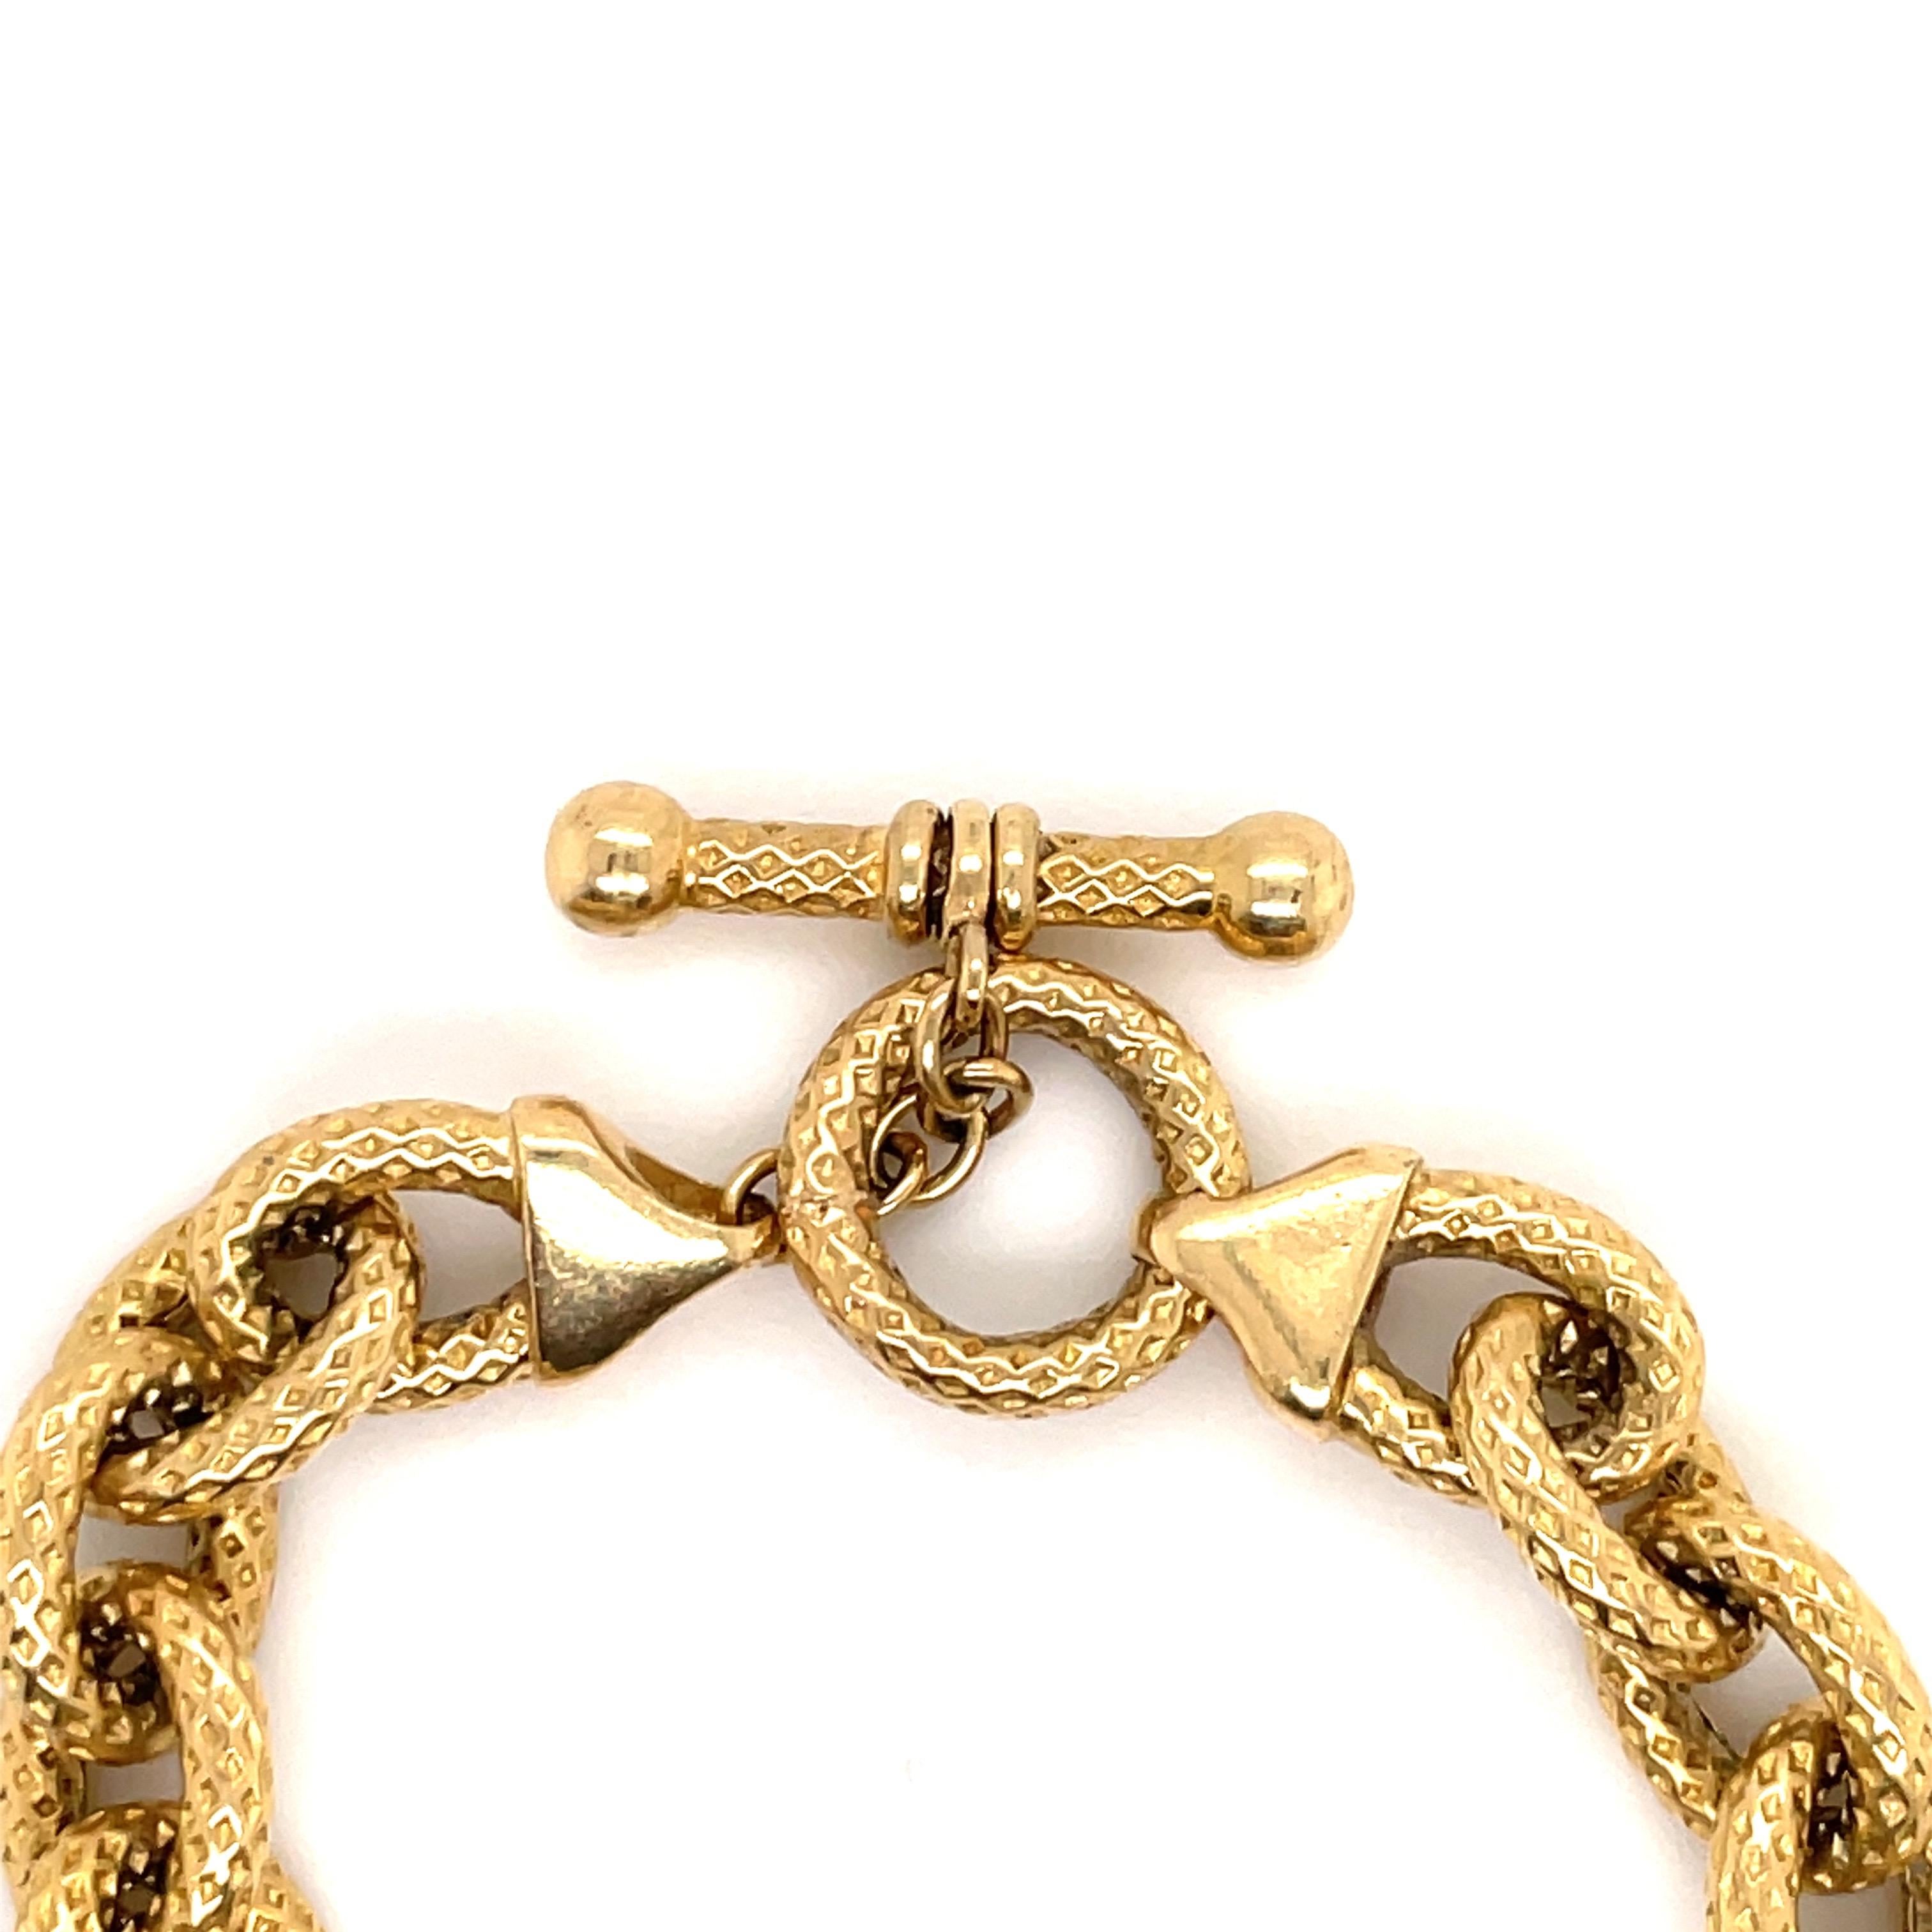 14 Karat Yellow Gold bracelet featuring 19 oval hammered links weighing 17.3 grams. Made In Italy.
Great for stacking!
More Link Bracelets Available.